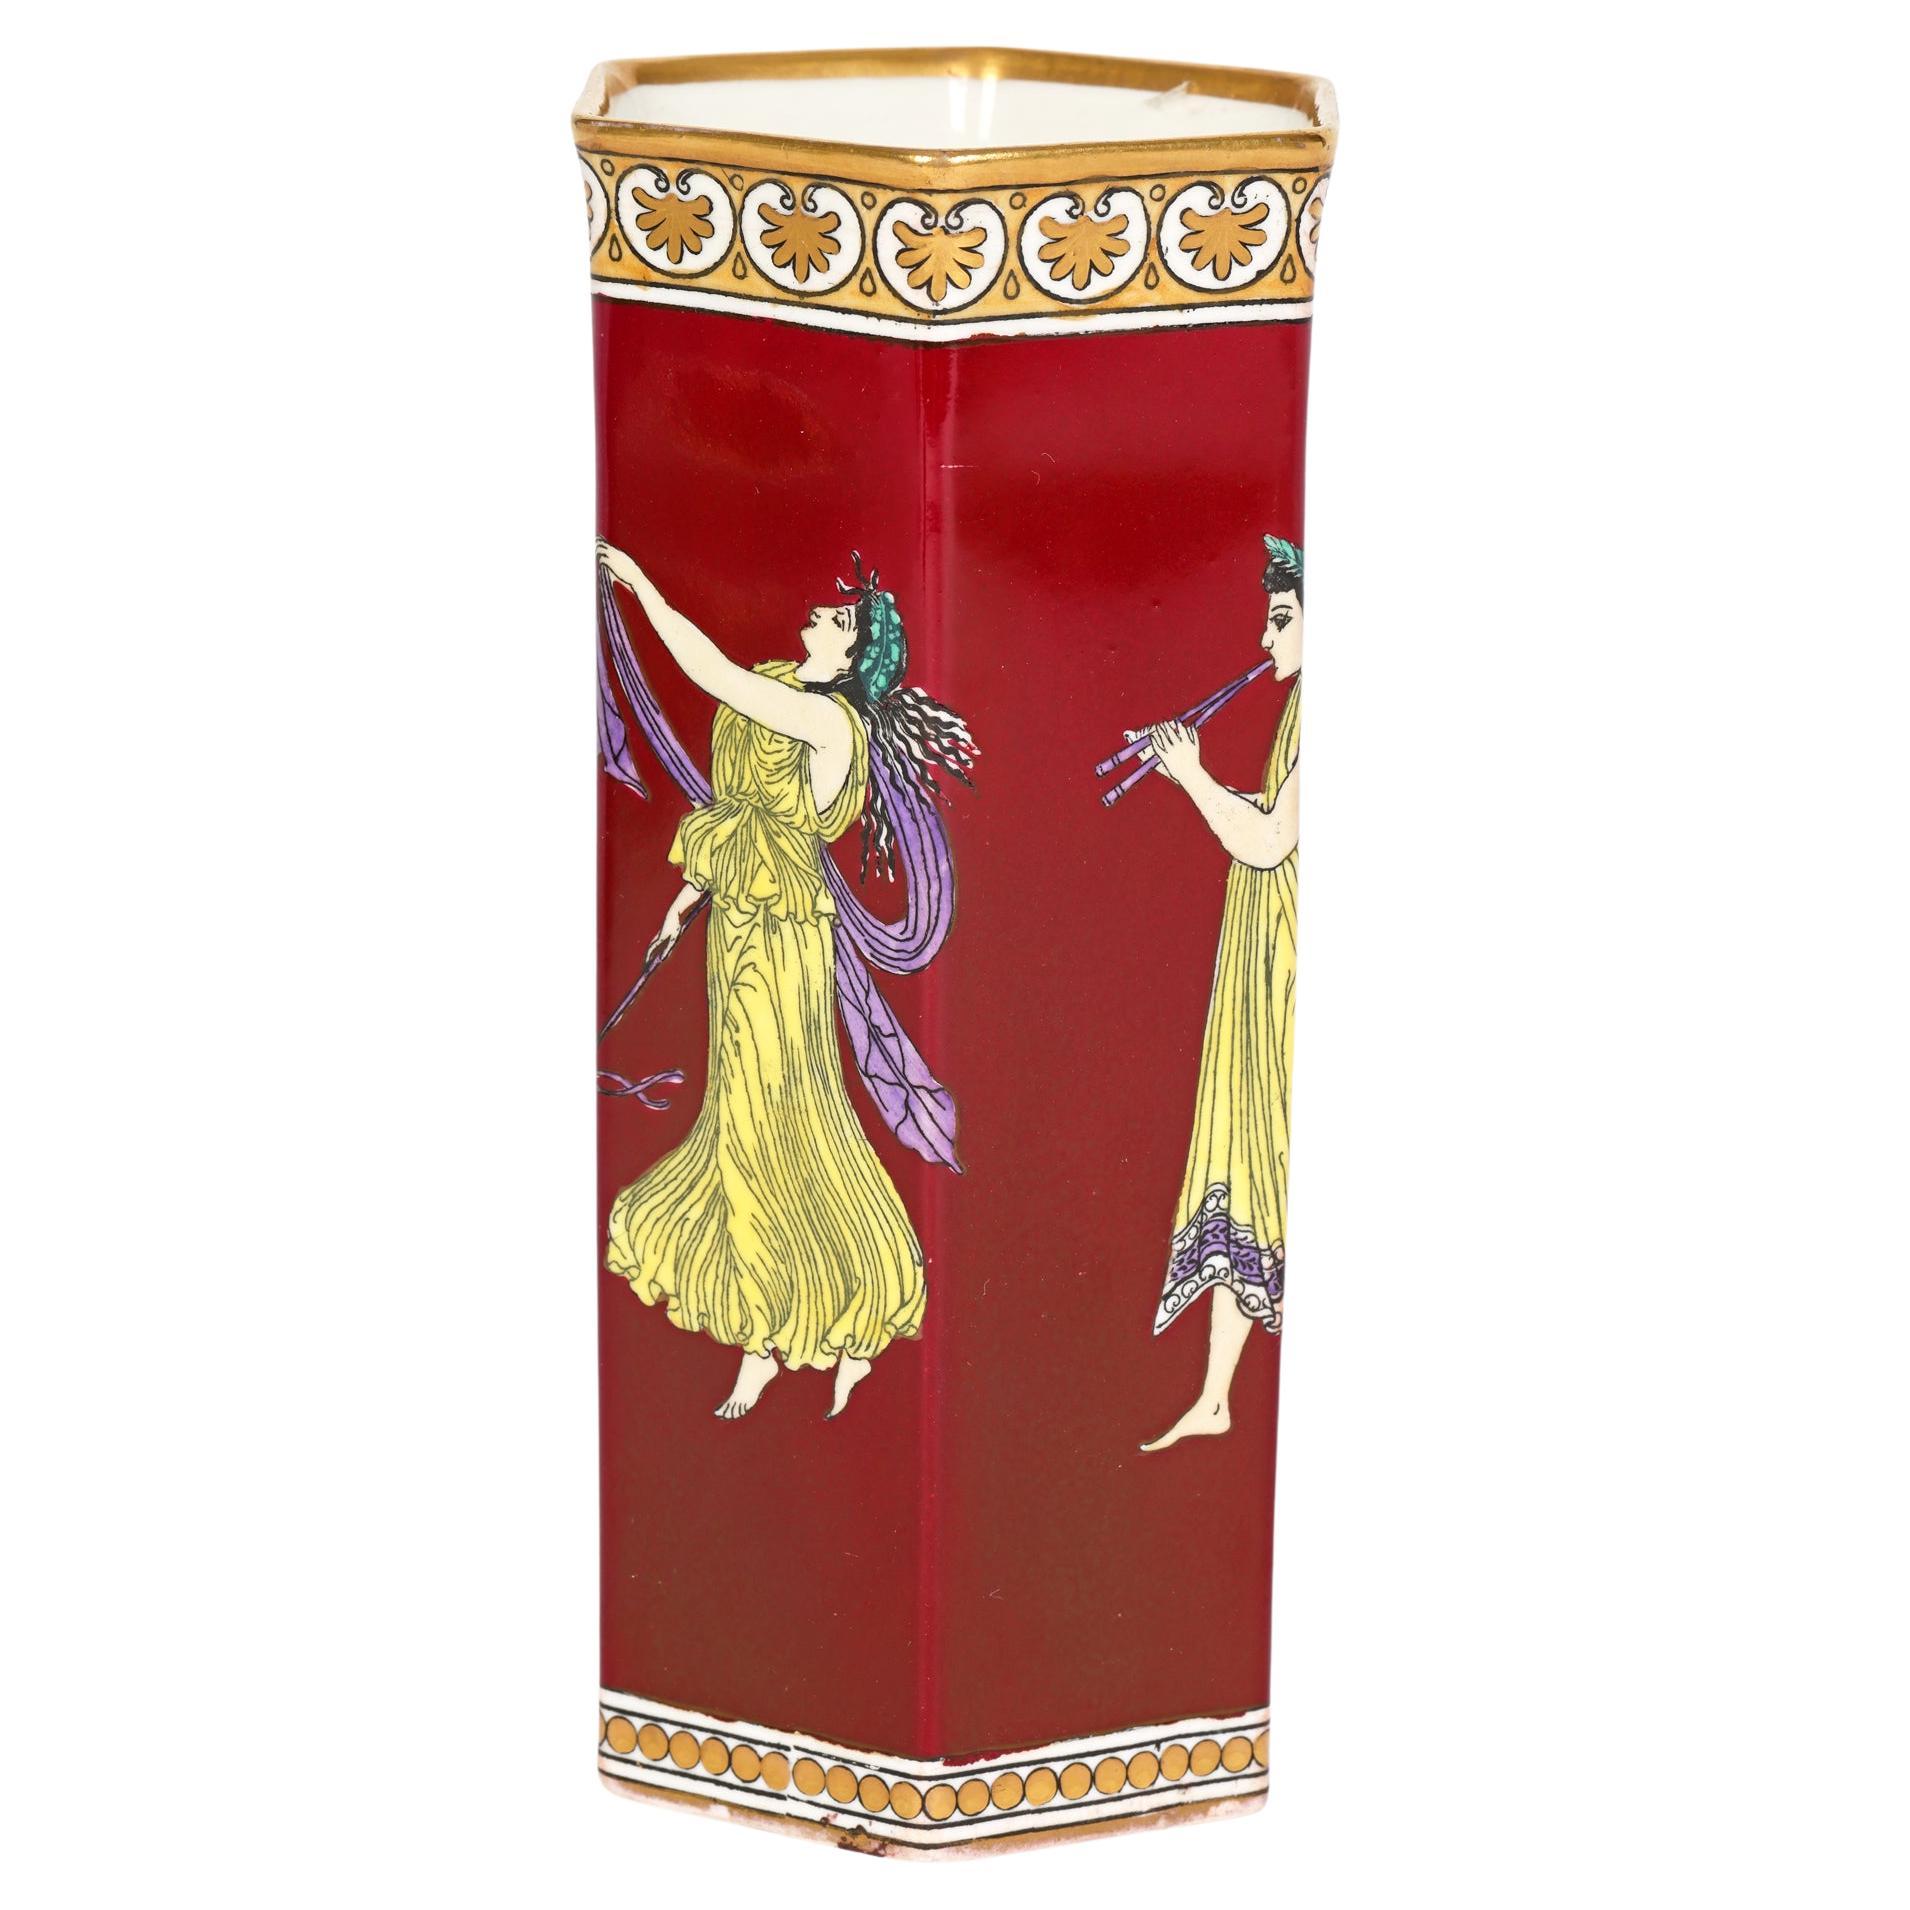 A fine quality Art Deco Tuscan China Grecian Ware porcelain vase decorated with classical figures by RH & SL Plant, Longton, Staffordshire dating from around 1920. The tall hexagonal shaped vase stands on an unglazed foot rim and has a slightly